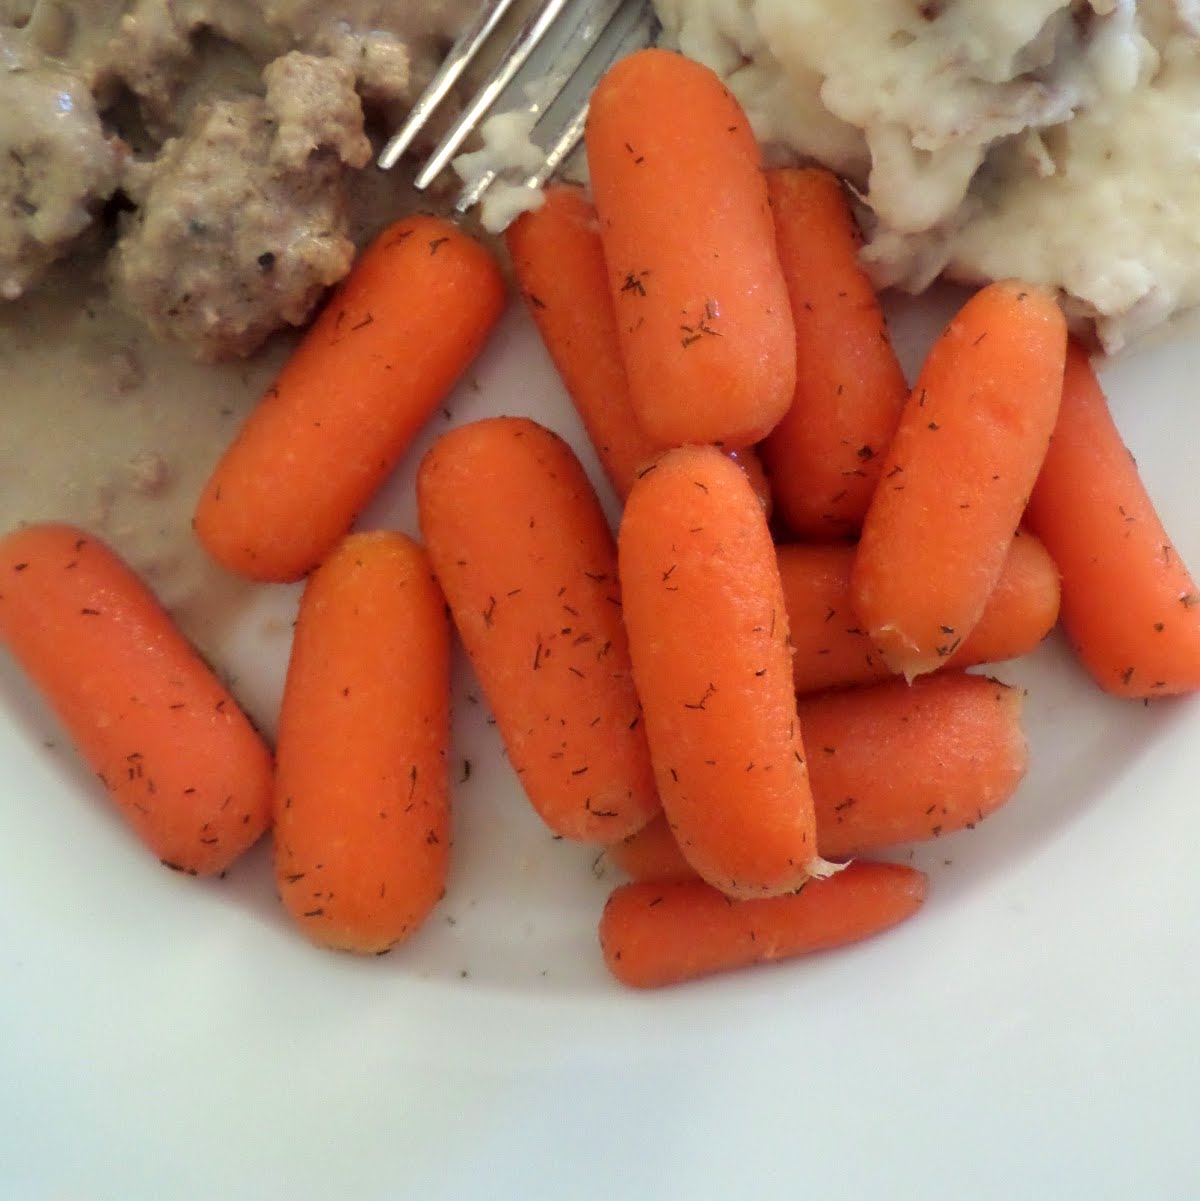 Sweet Dill Glazed Carrots:  Tender orange carrots cooked in a butter, brown sugar, and dill sauce.  A colorful and flavorful vegetable side dish.